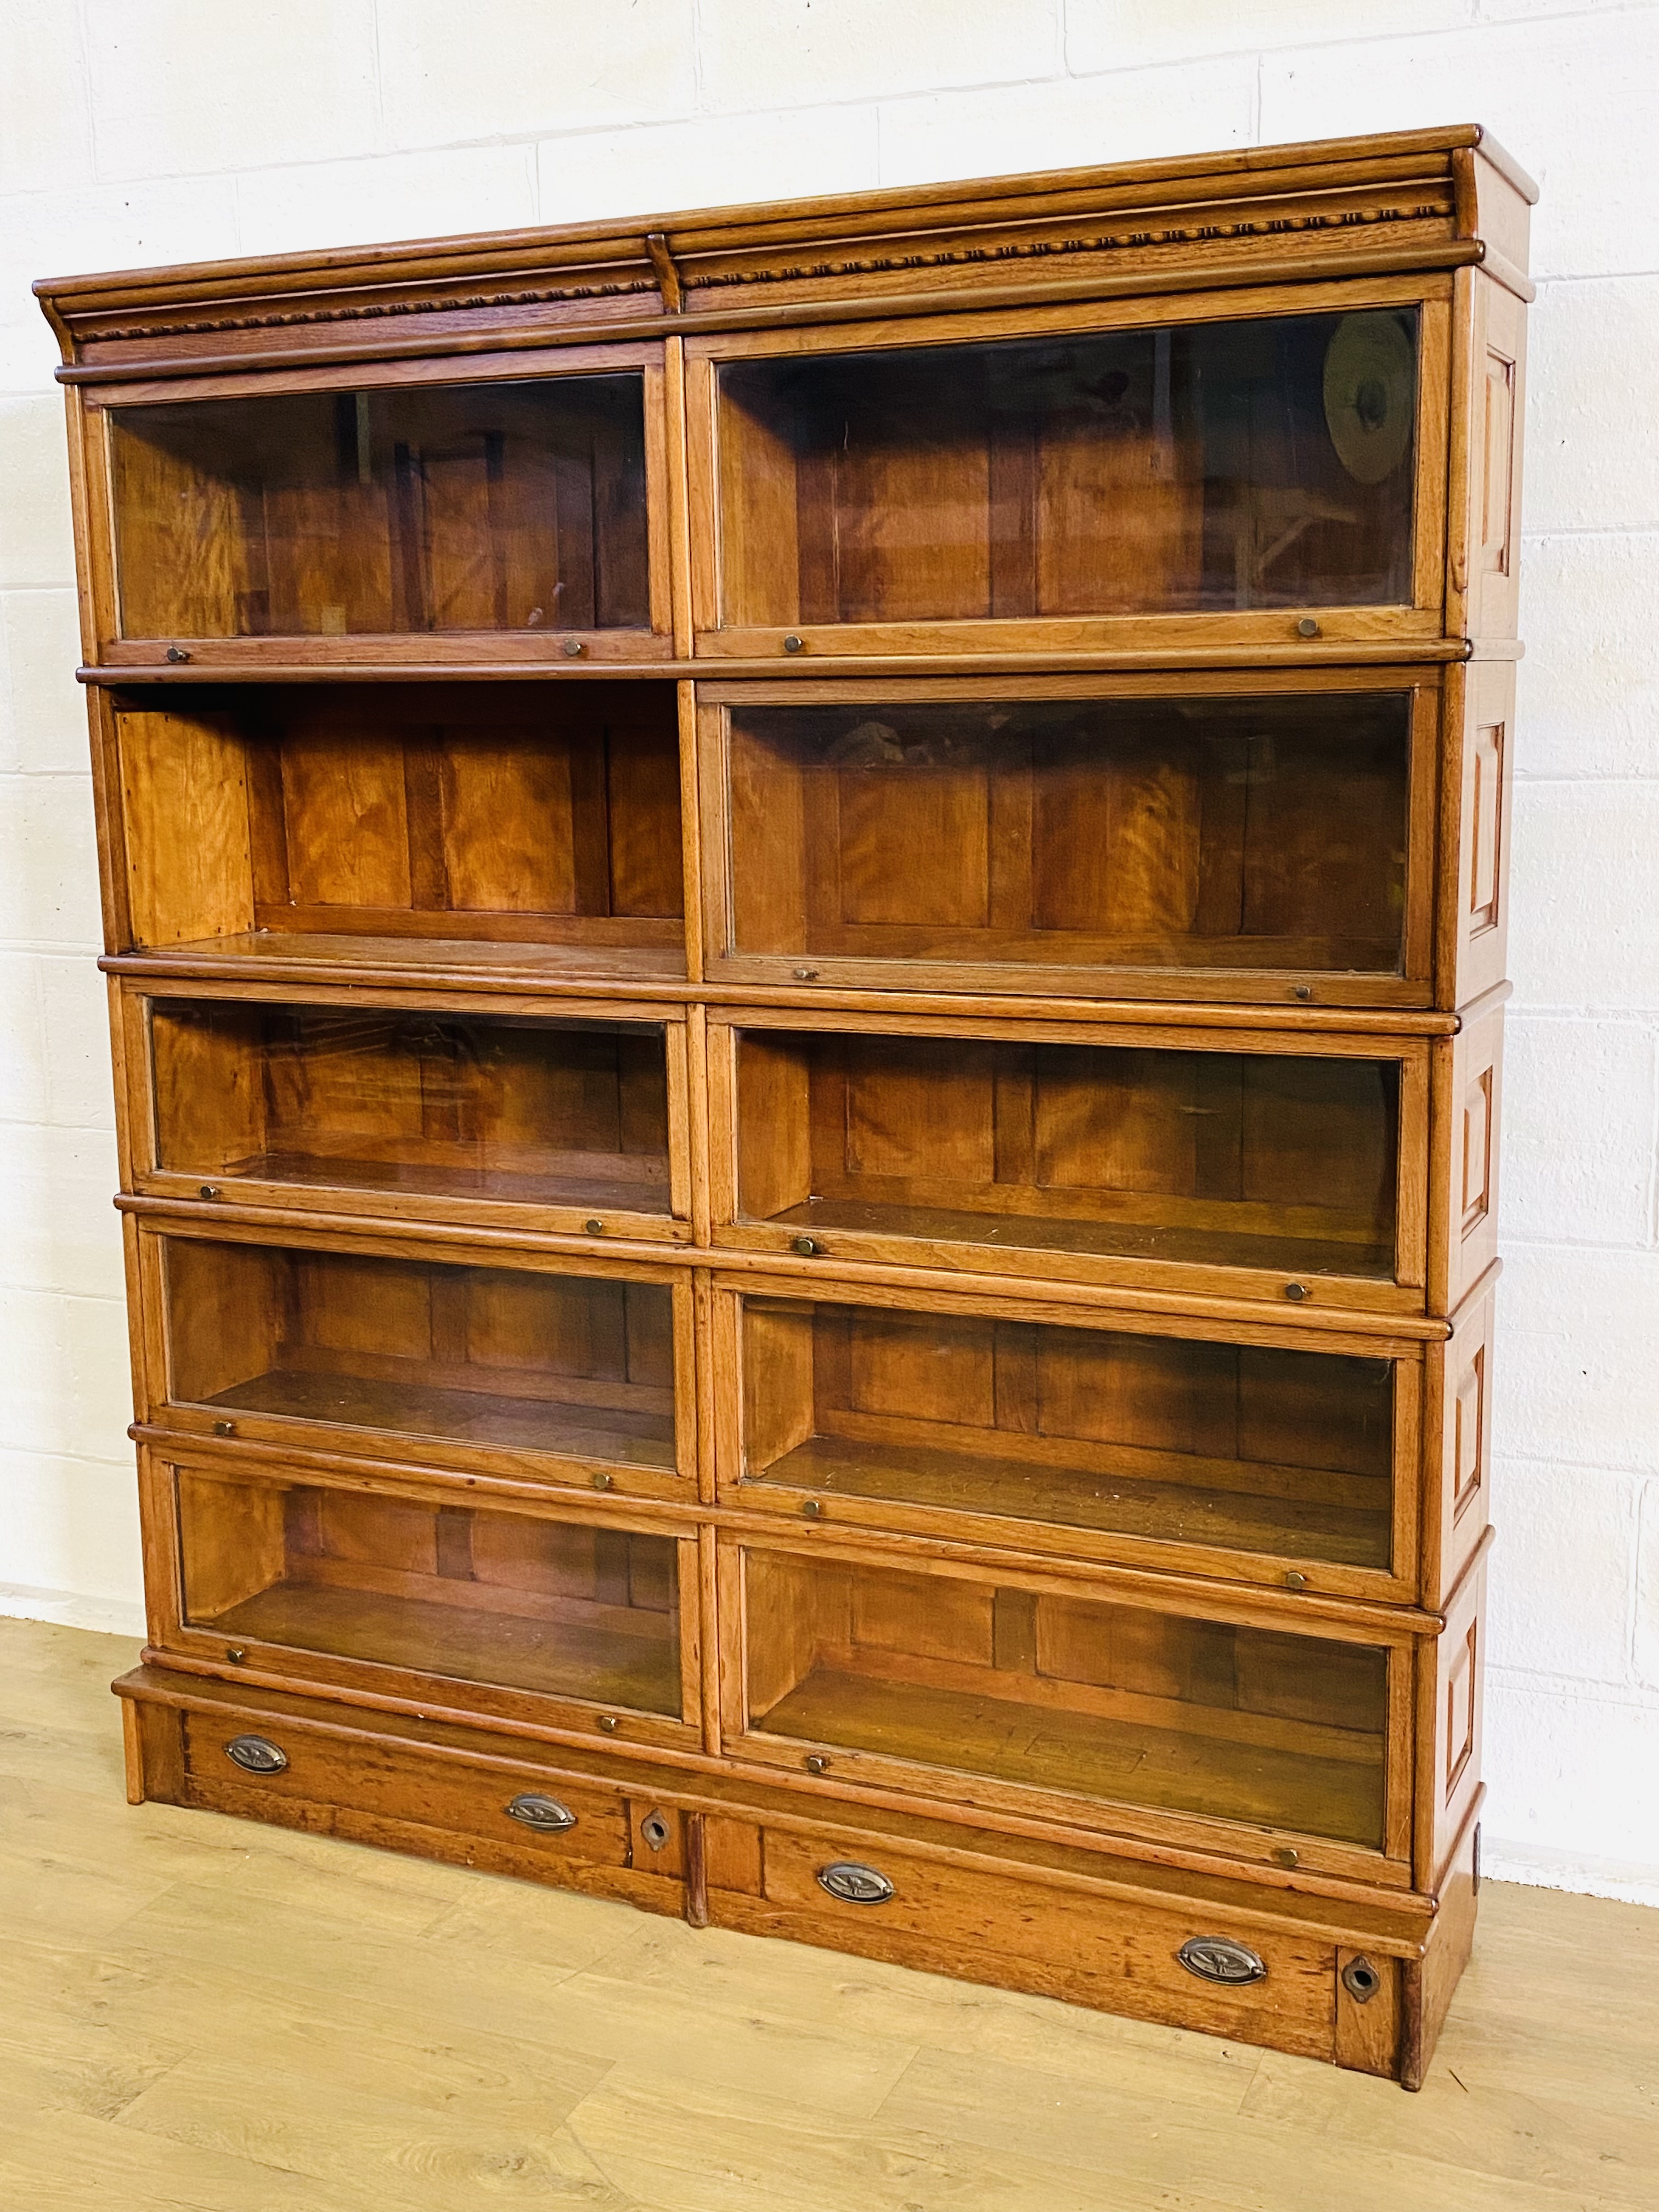 Wernicke mahogany barristers bookcase - Image 6 of 7